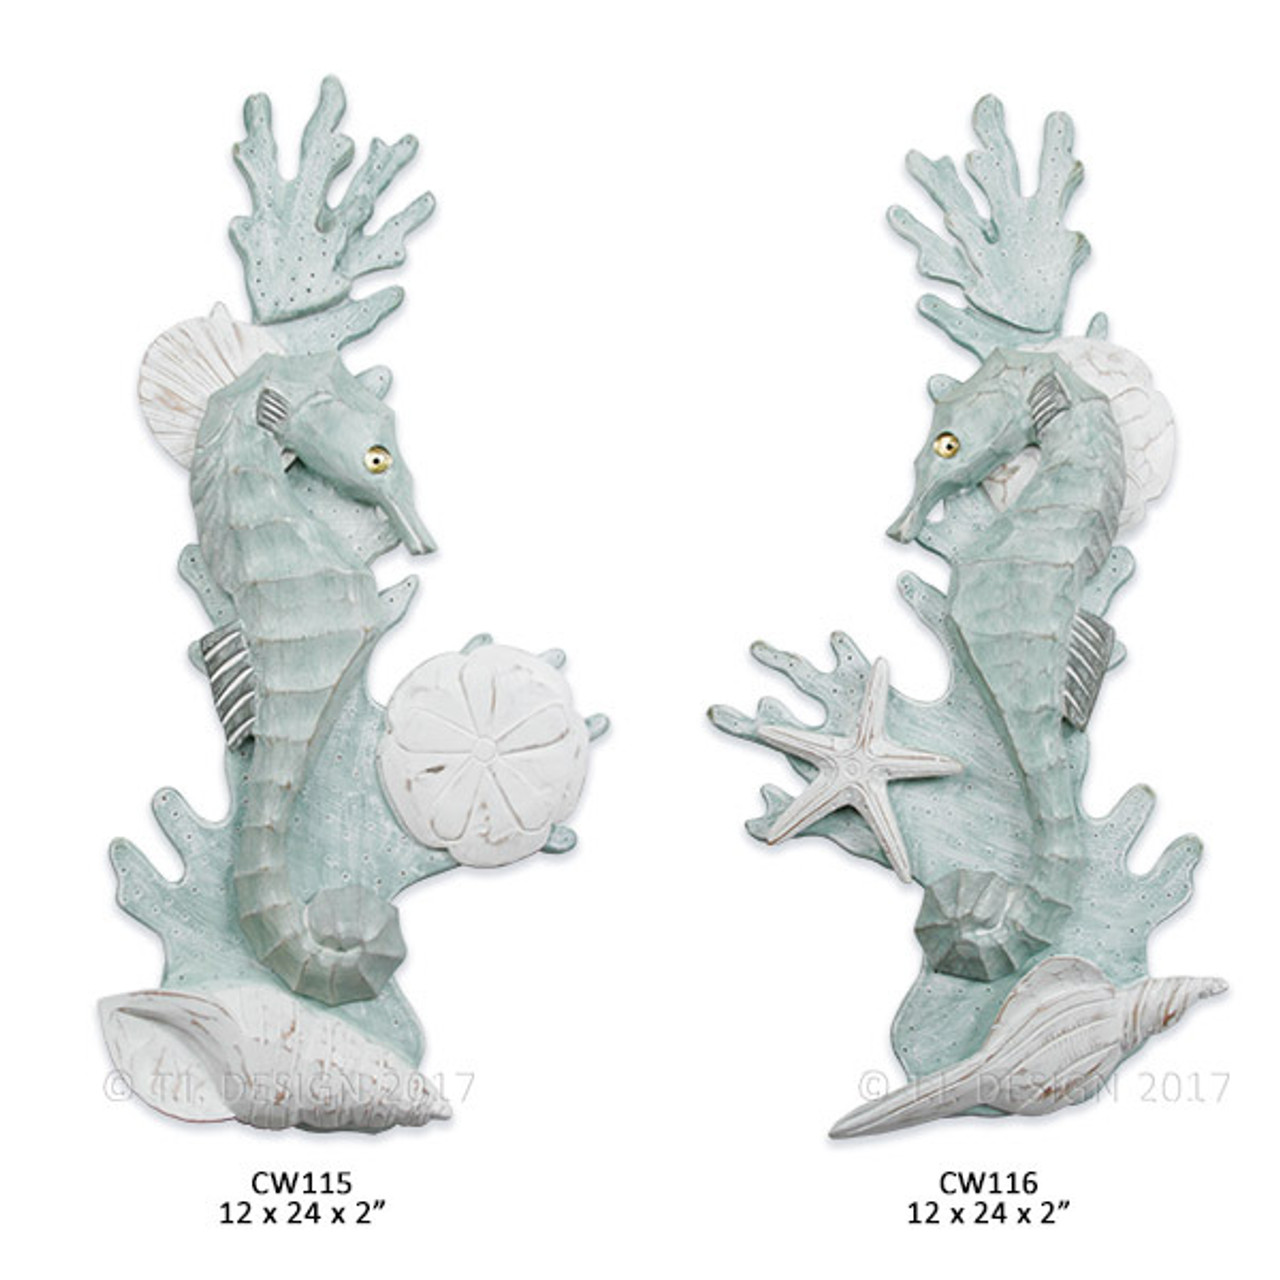 Seahorse Reef Racing - Right and Left Facing Pair - Wooden Wall Sculpture
ONLY RIGHT FACING INCLUDED IN THIS PURCHASE, LEFT AVAILABLE FOR SEPERATE PURCHASE